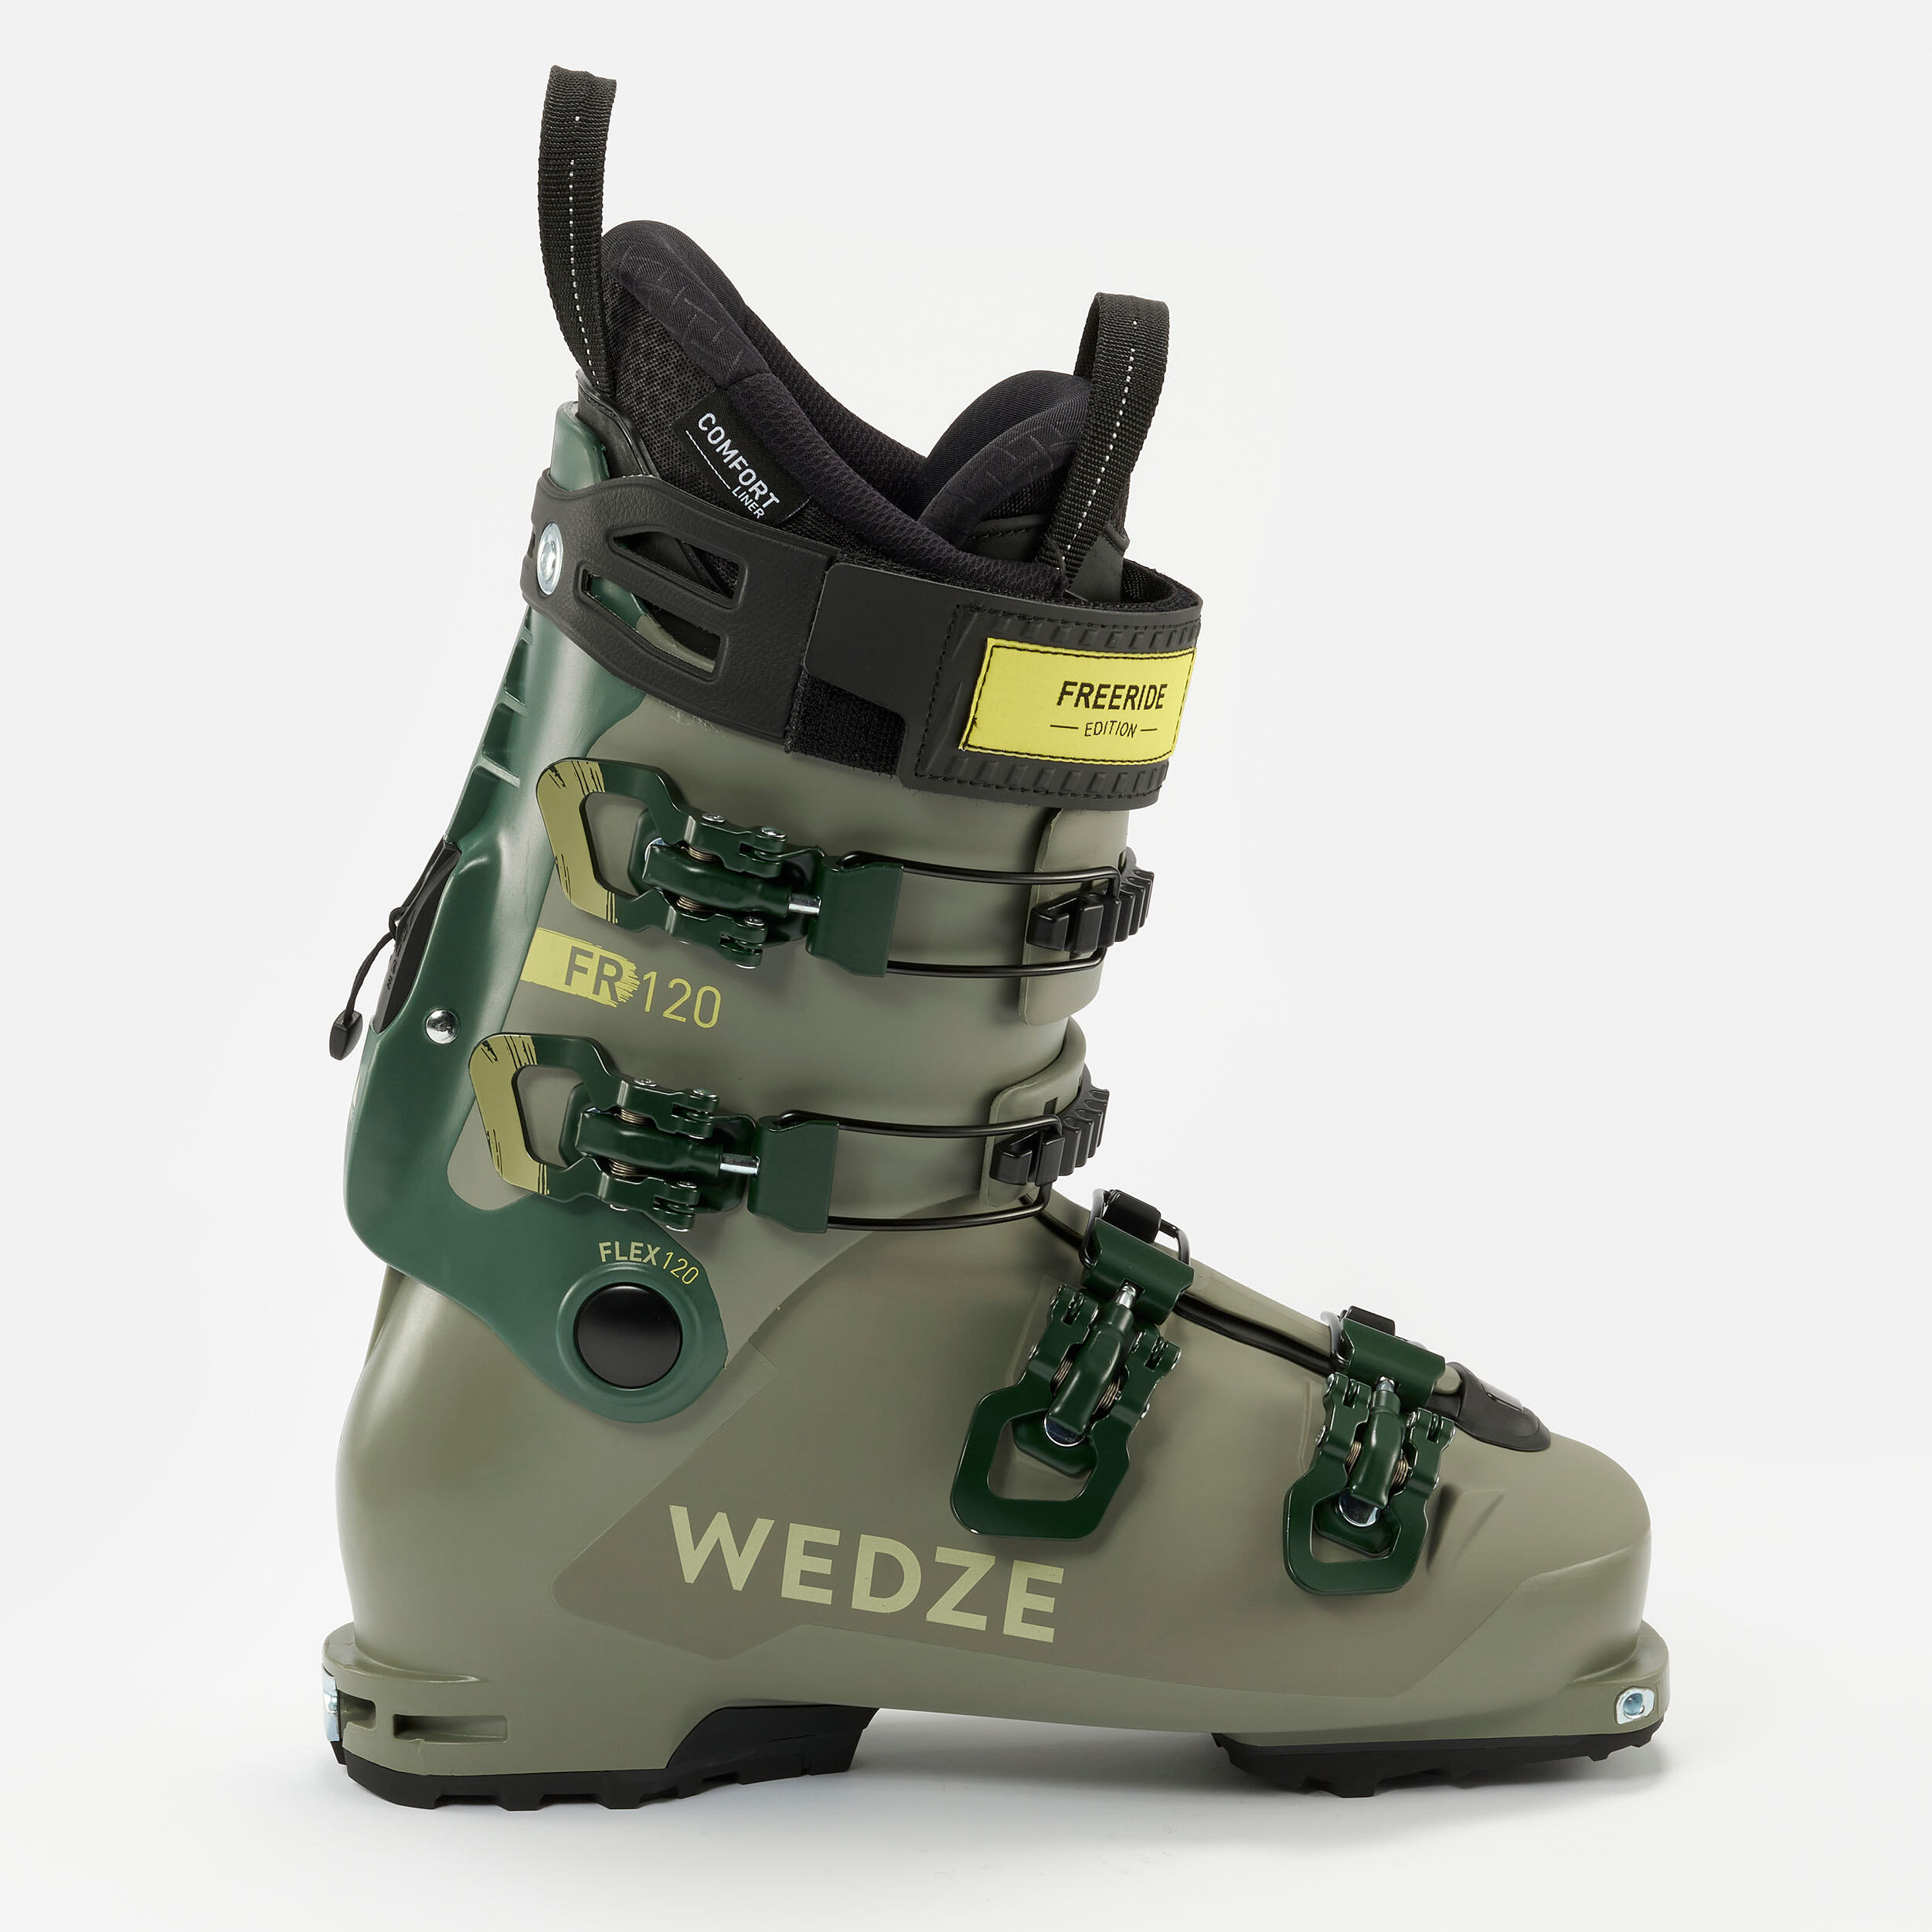 ADULT FREERIDE FREE TOURING SKI BOOTS - FR120 4/14